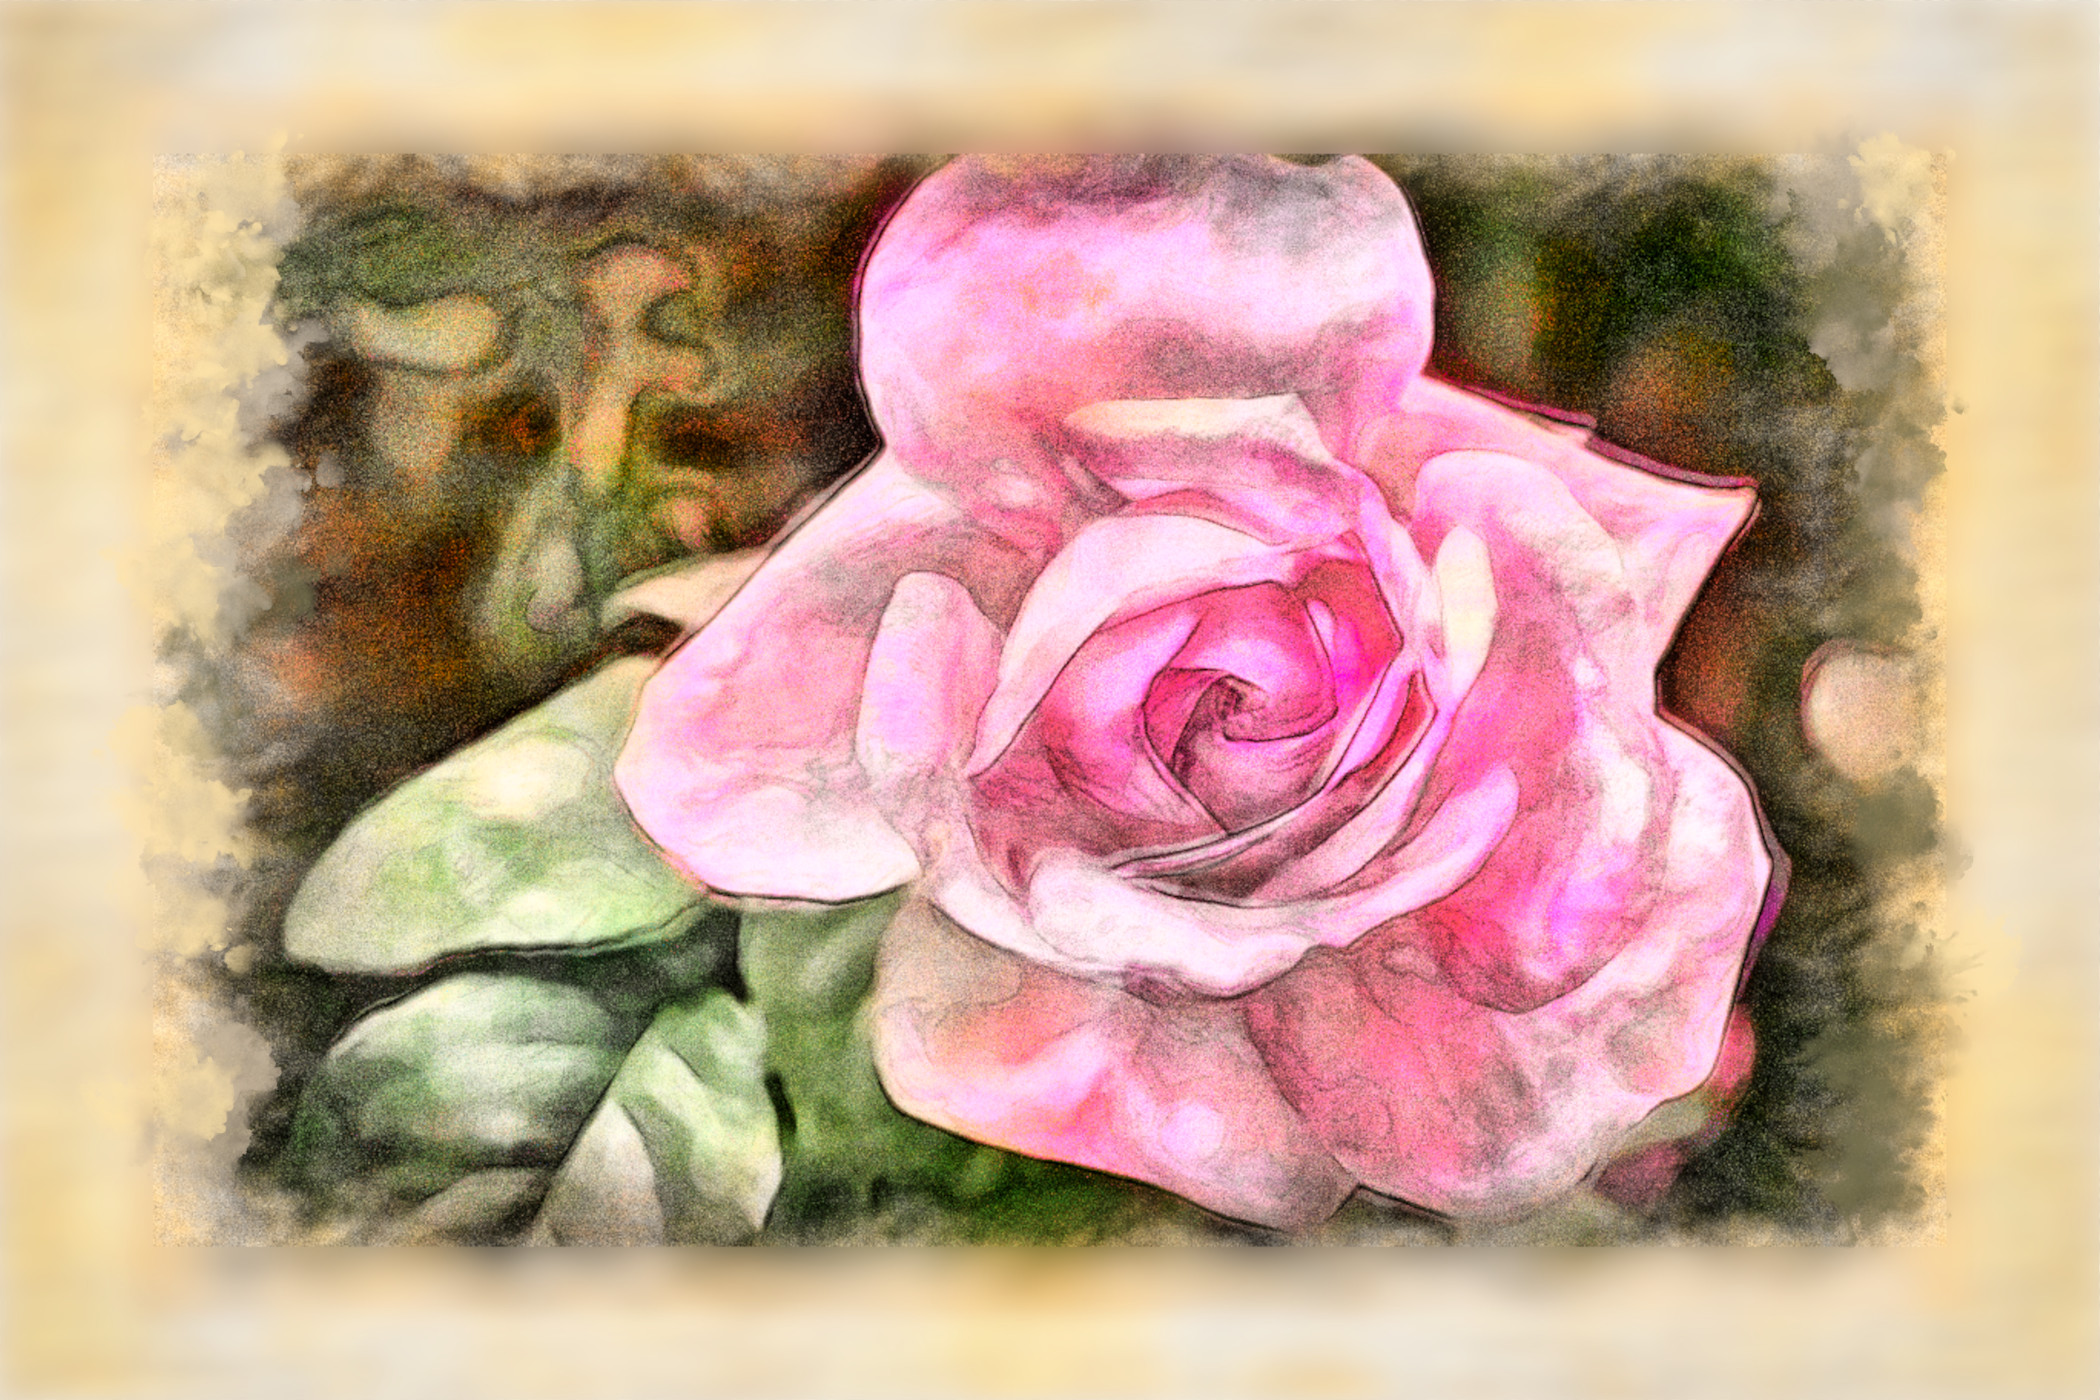 2023-09-27 16-45-29 rose-4290866_1920 with a Watercolor Pastels Effect 2023 (5.0,75.0,32.0,True,75.0).jpg